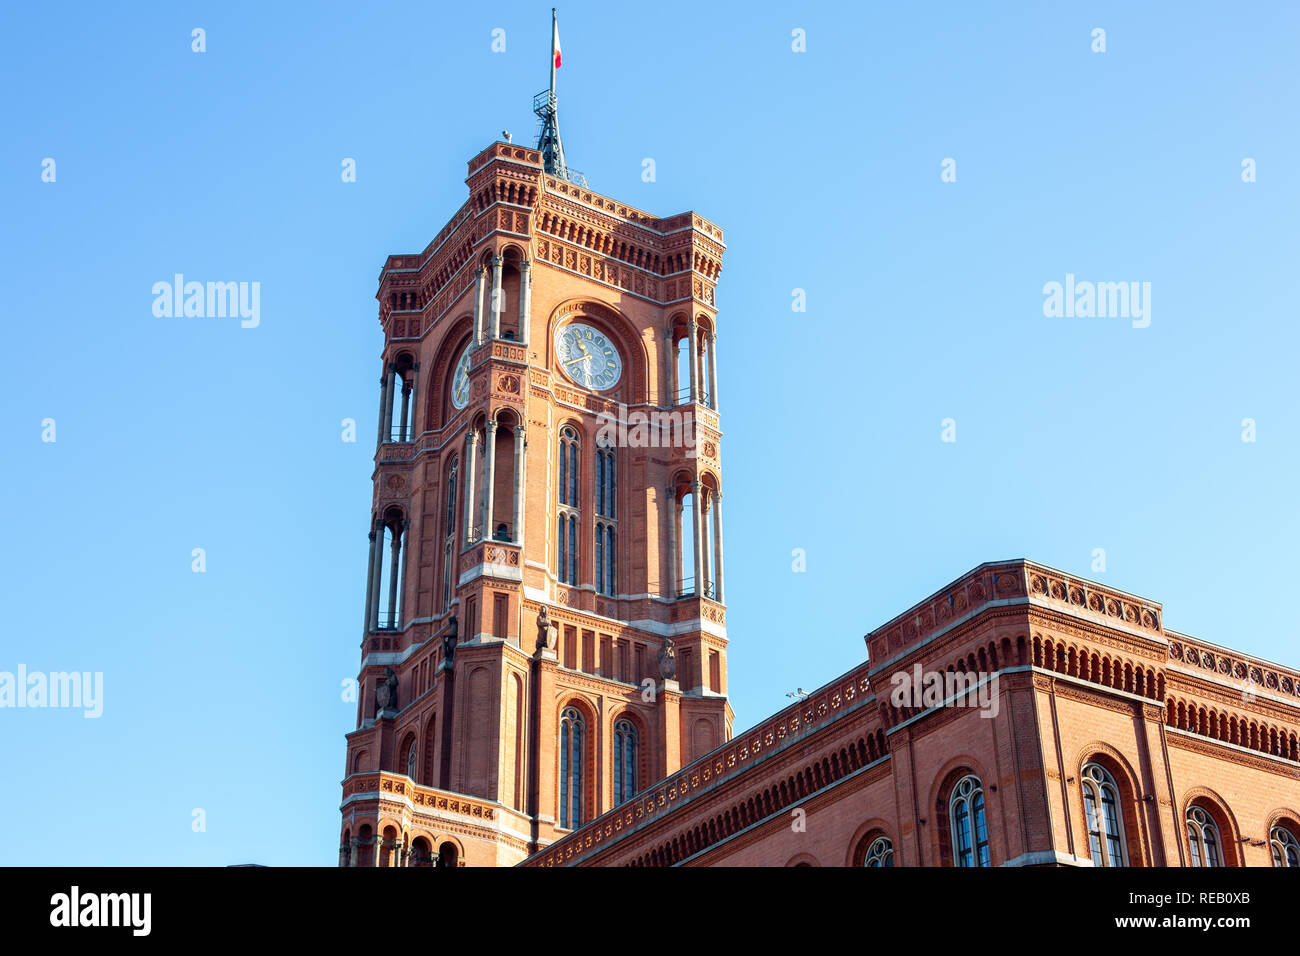 View of Rotes Rathaus or Berlin Town Hall with blue sky background on Alexanderplatz in Berlin, Germany. December 2018. Stock Photo